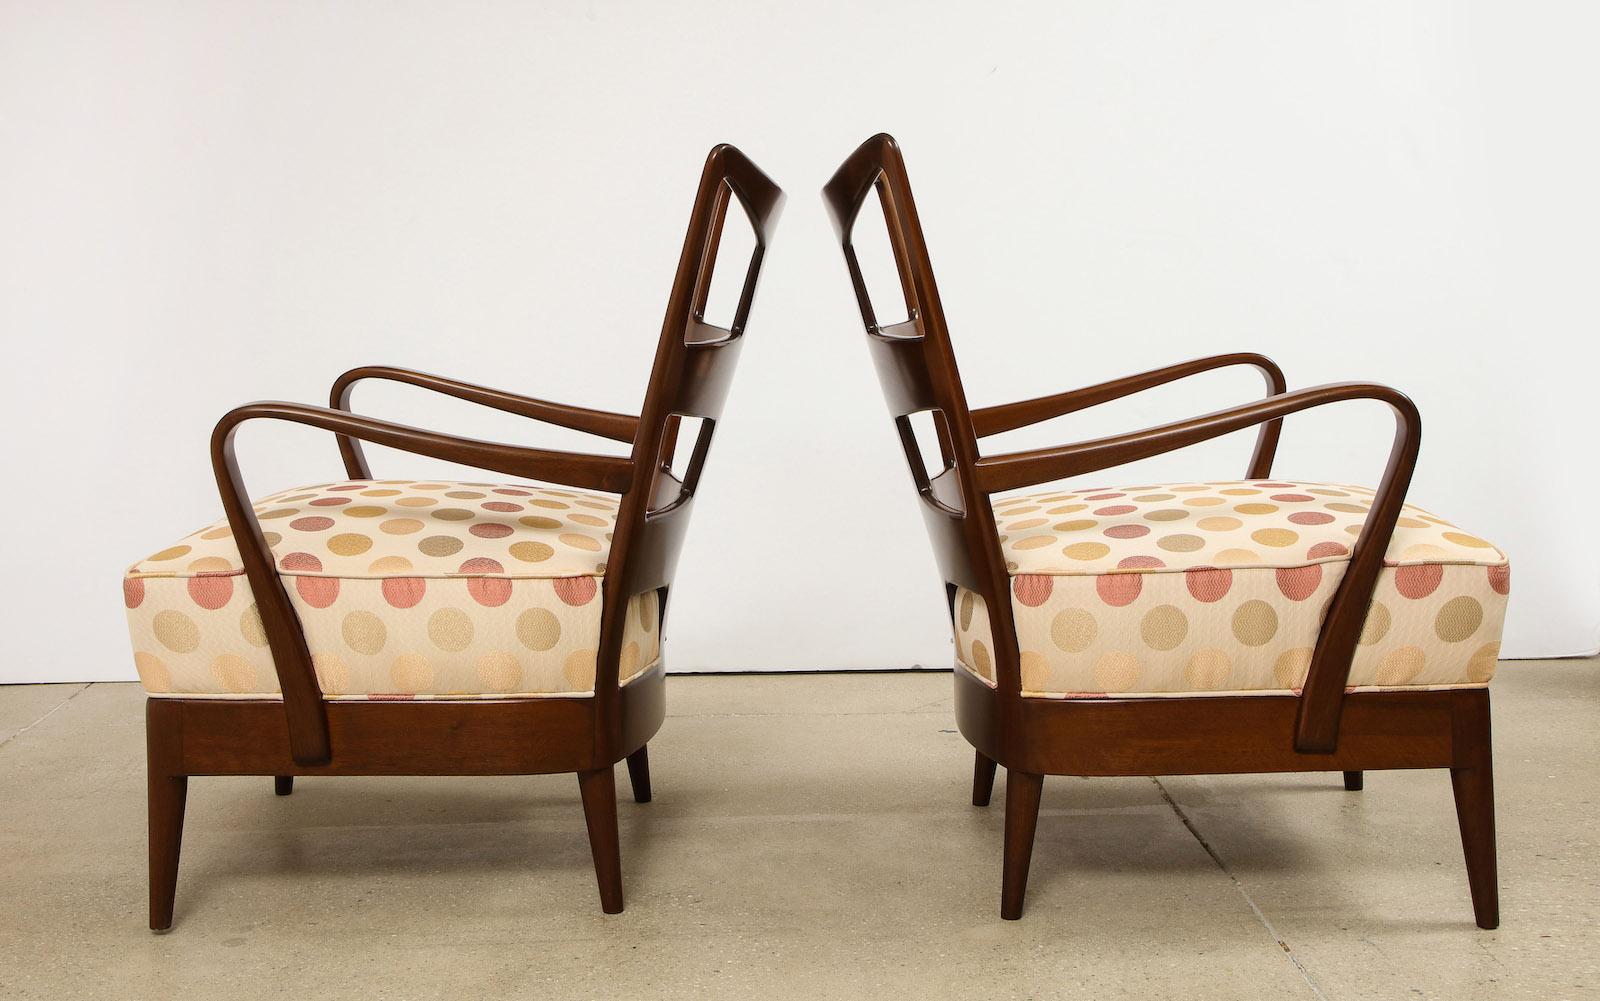 Rare Pair of 6575 Open Armchairs by Osvaldo Borsani. Sculptural walnut frames with upholstered seats. This chair model was originally designed for the Casa Borsani in Varedo and afterwrads also offered for sale in the ABV studio.
Published: Osvaldo